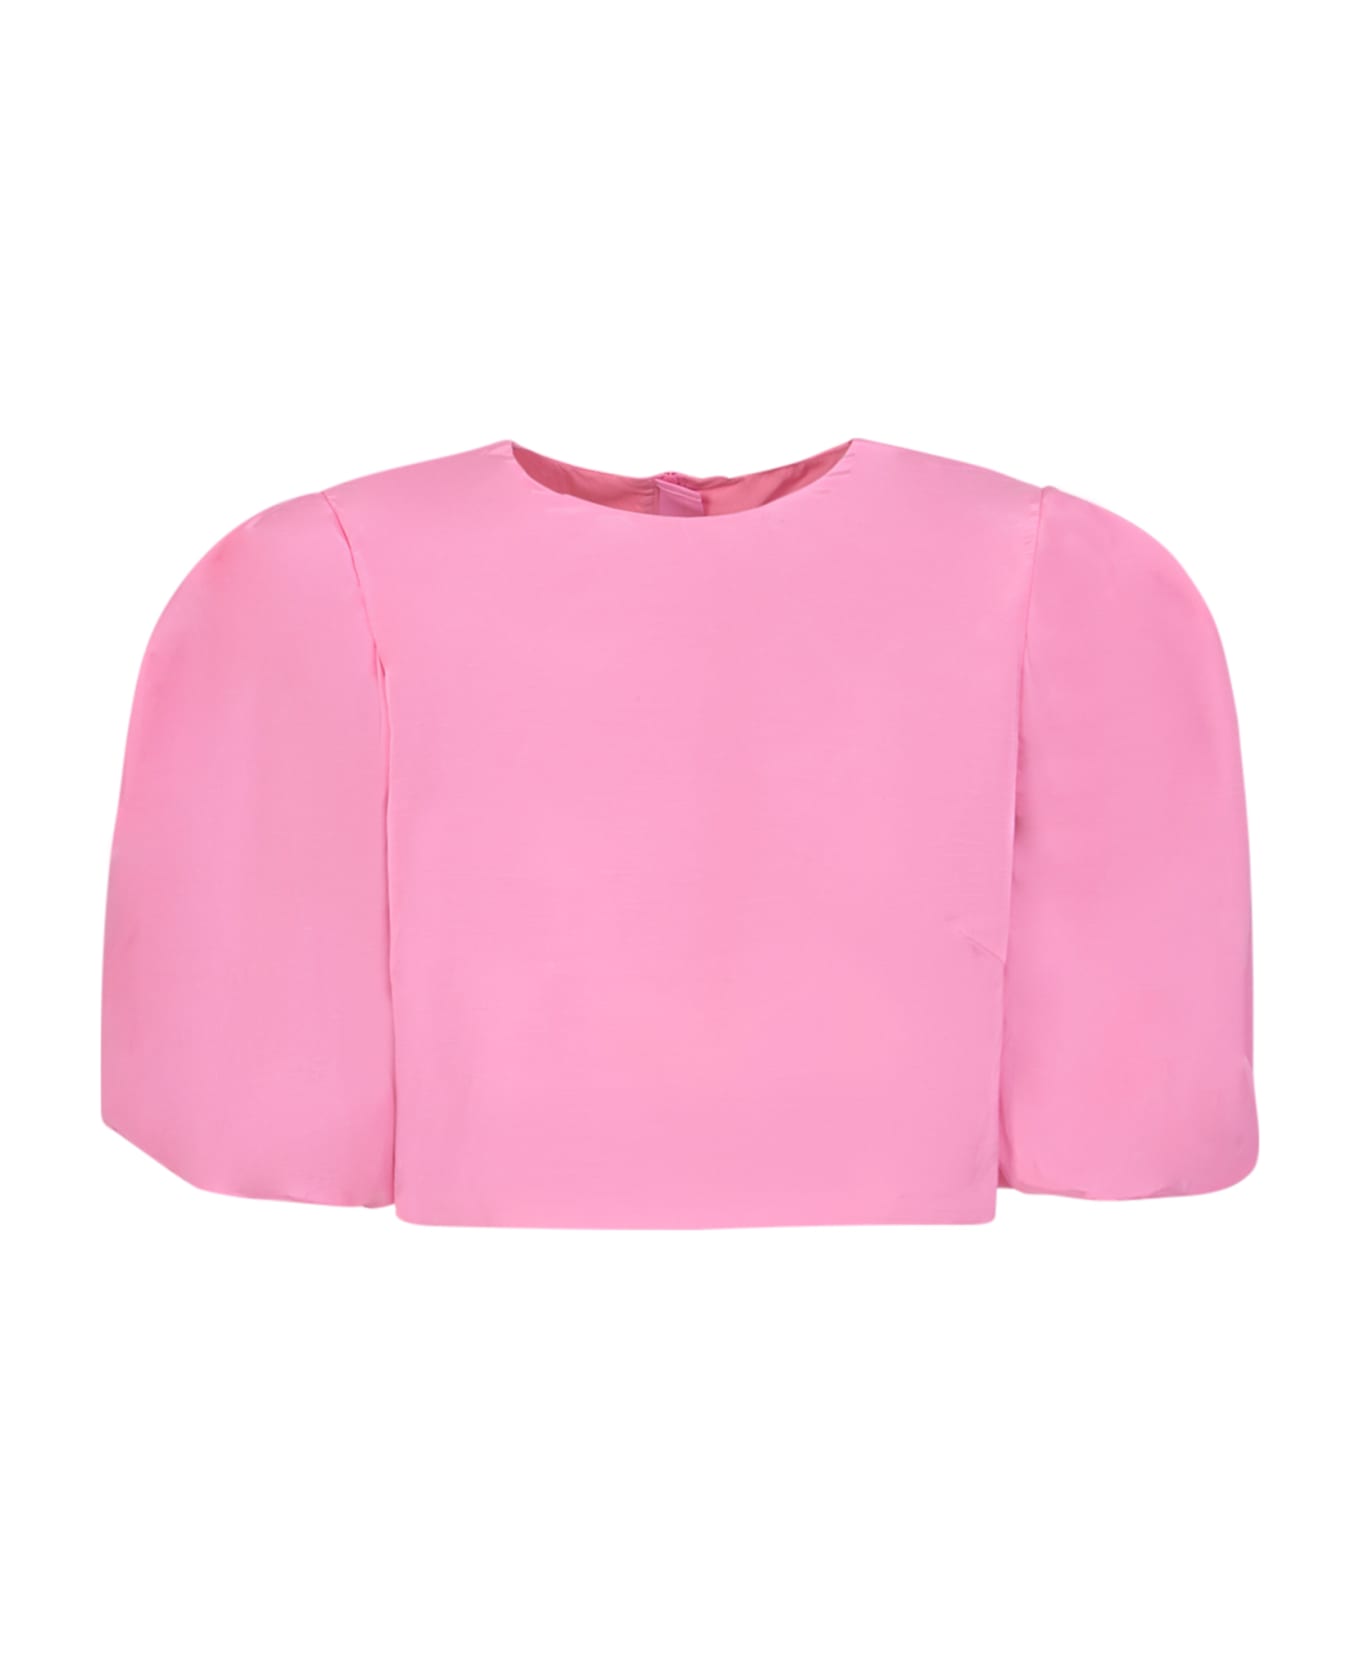 MSGM Pink Blouse - Pink トップス